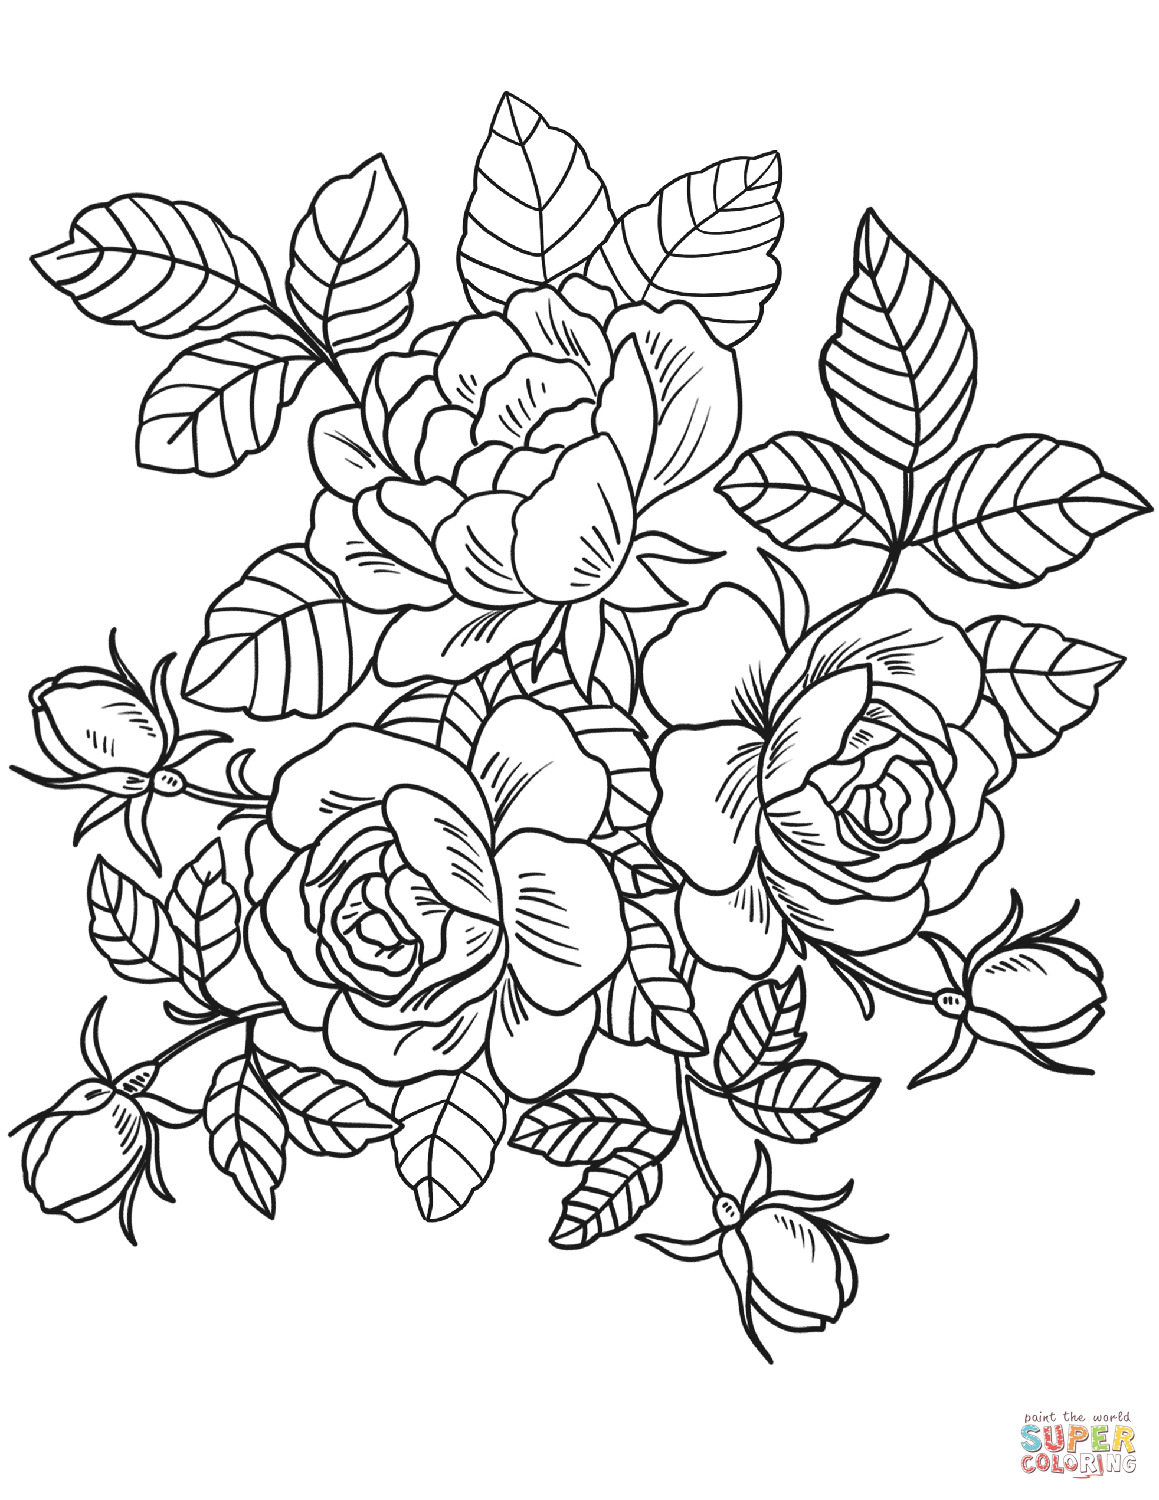 Roses flowers coloring page free printable coloring pages rose coloring pages detailed coloring pages flower coloring pages